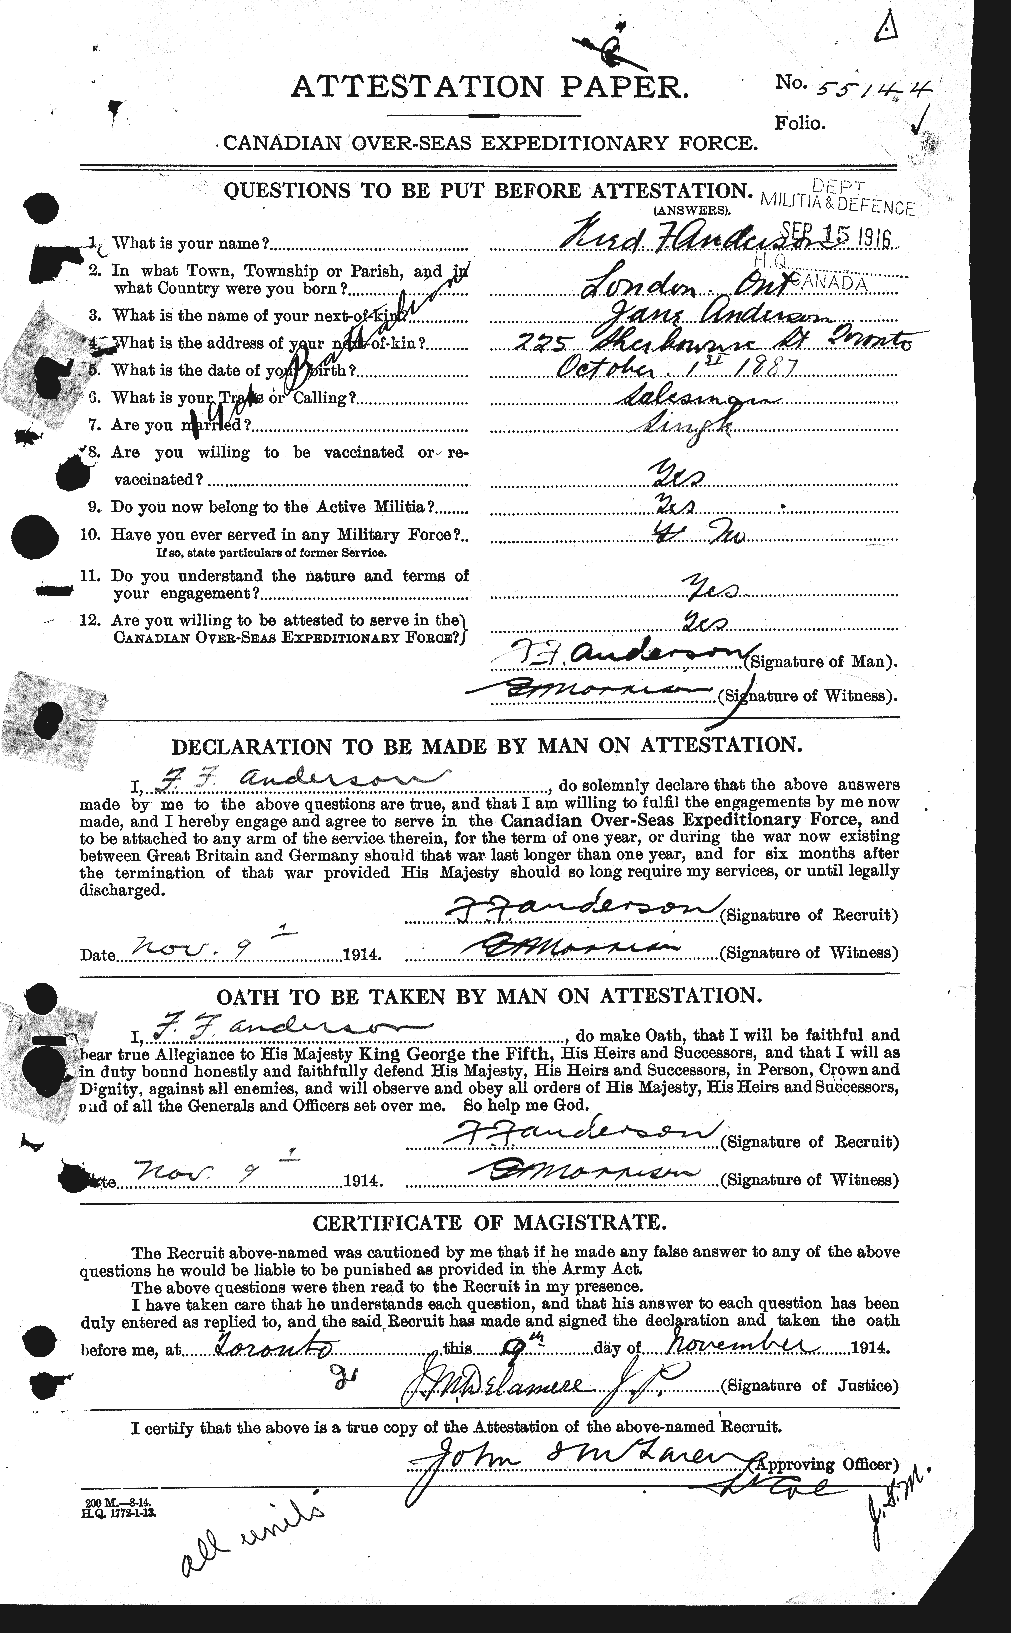 Personnel Records of the First World War - CEF 209834a